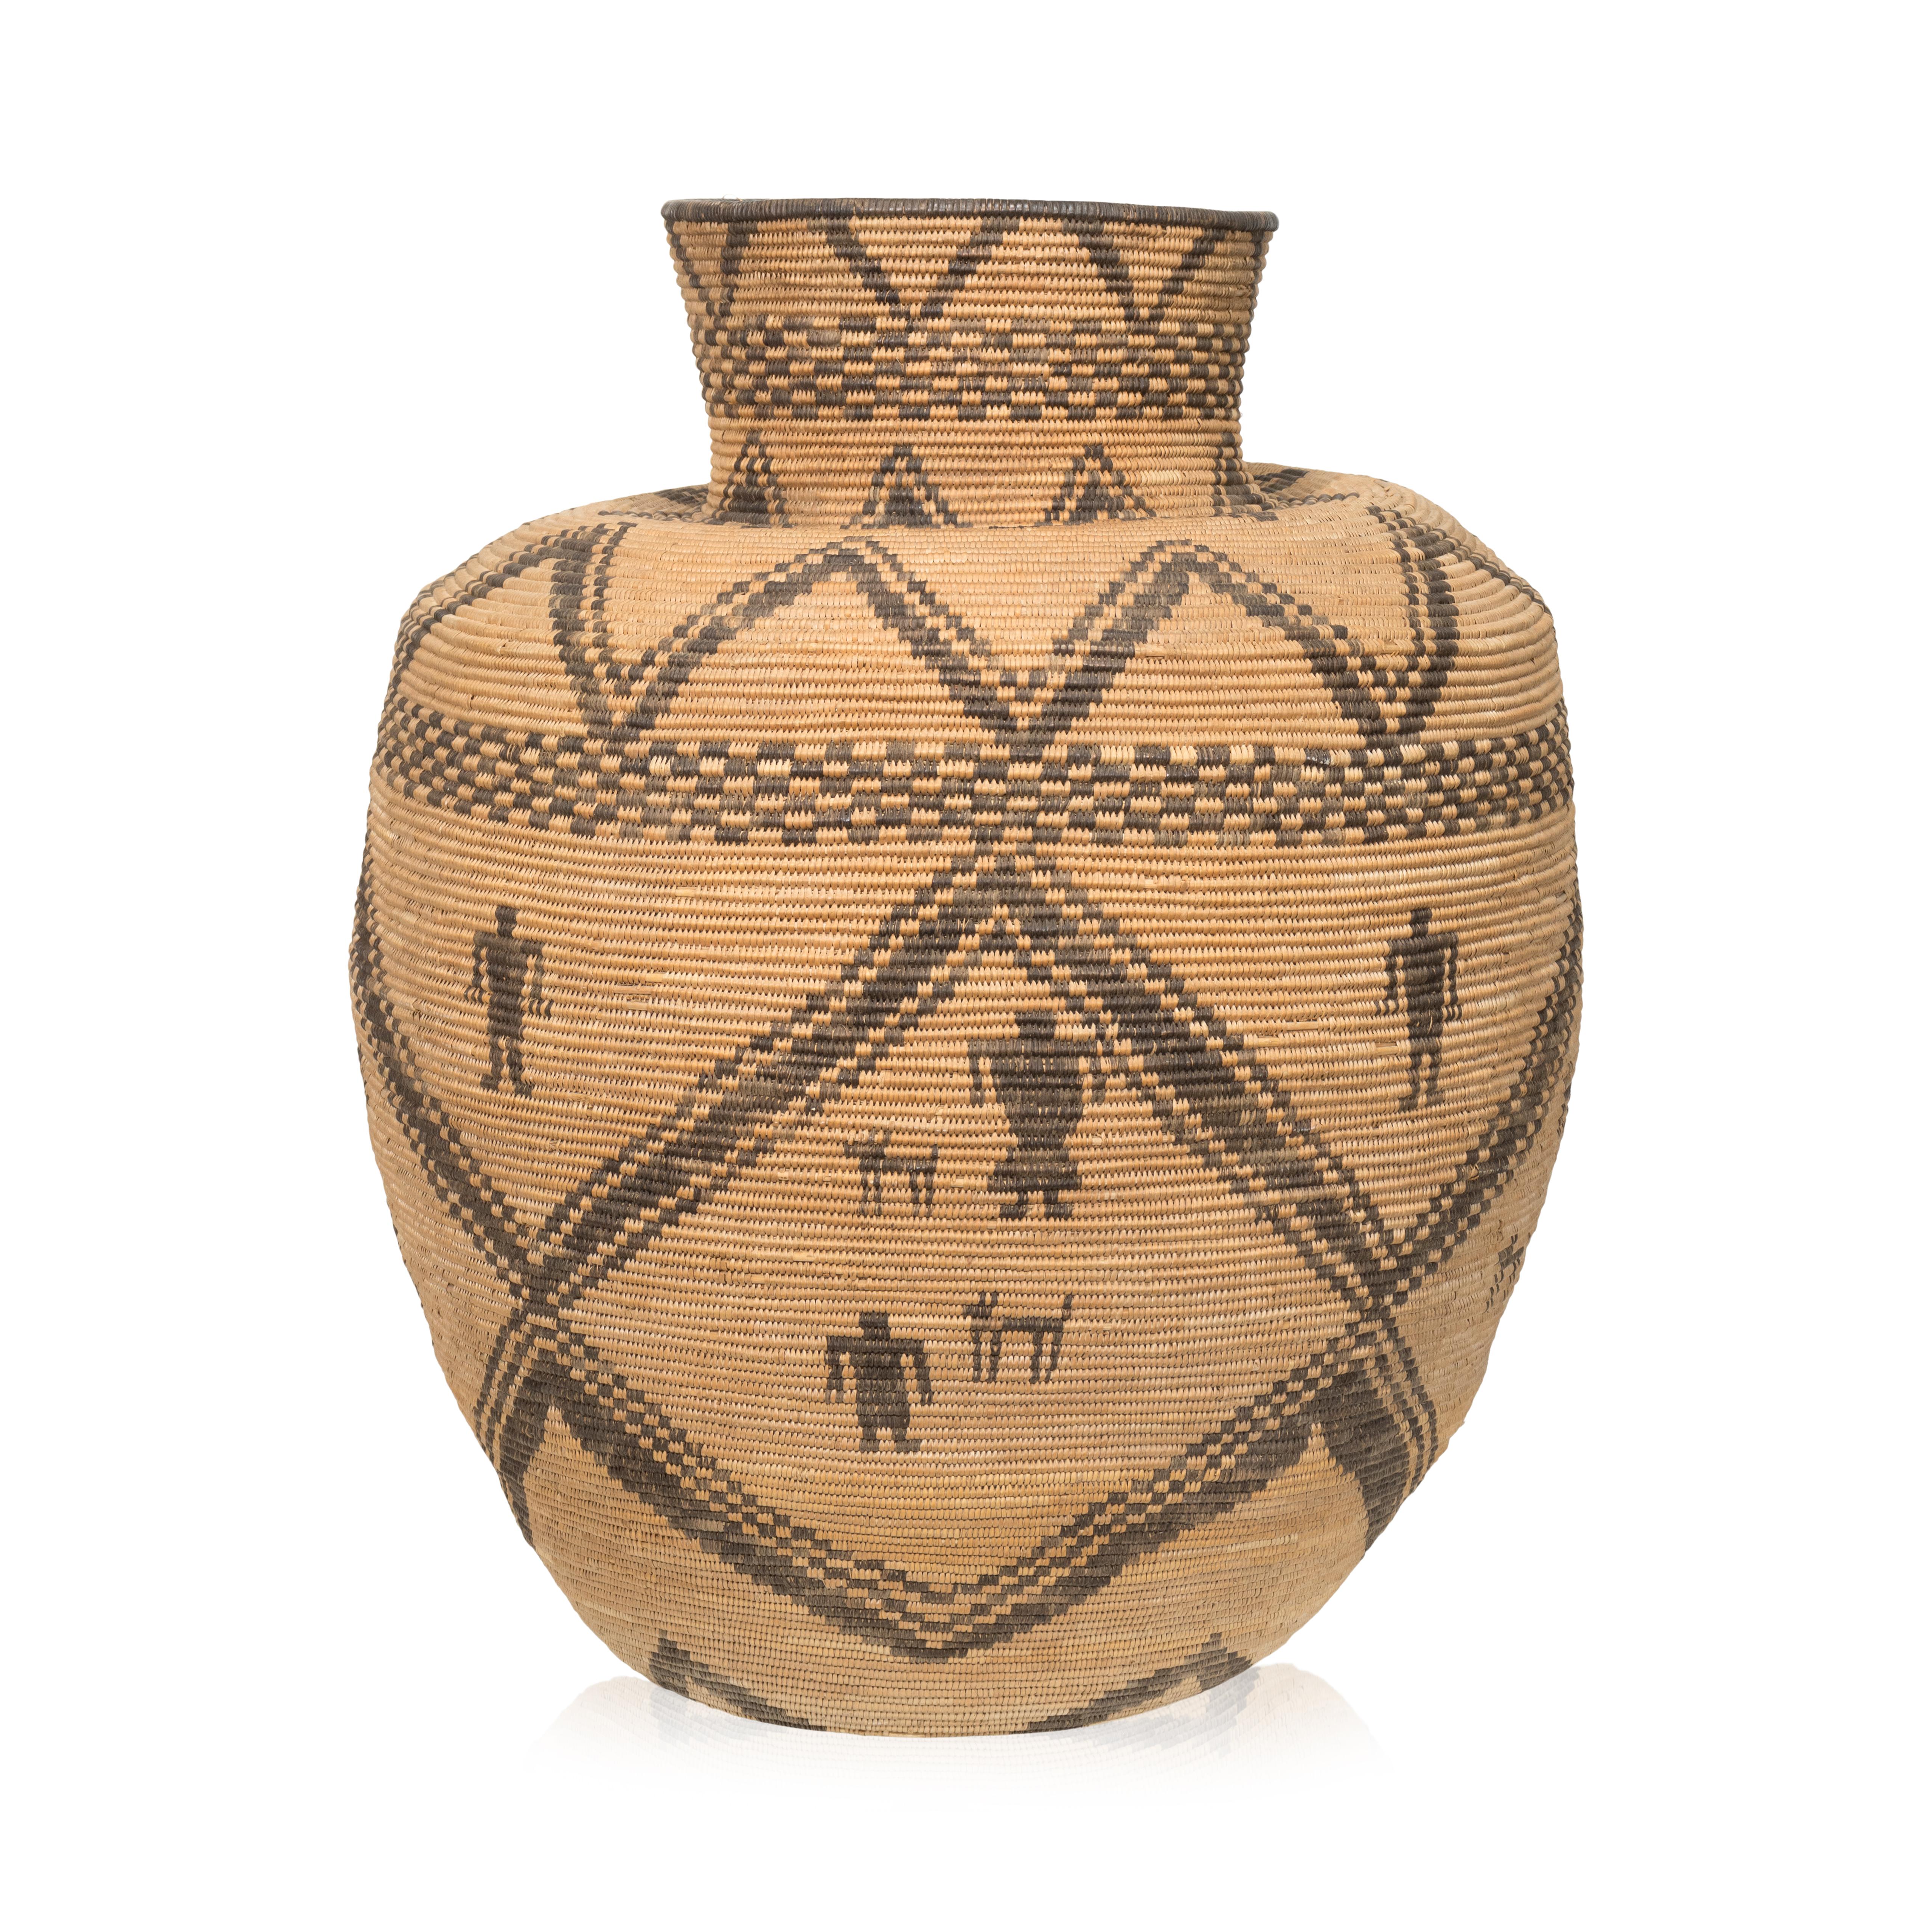 Apache figural basketry olla designed 14 male and female figures and 8 dogs. After an olla was filled to the brim with wild grass seeds such as chia or amaranth, or domestic plant products like corn or beans, a basketry lid or cover was put on top